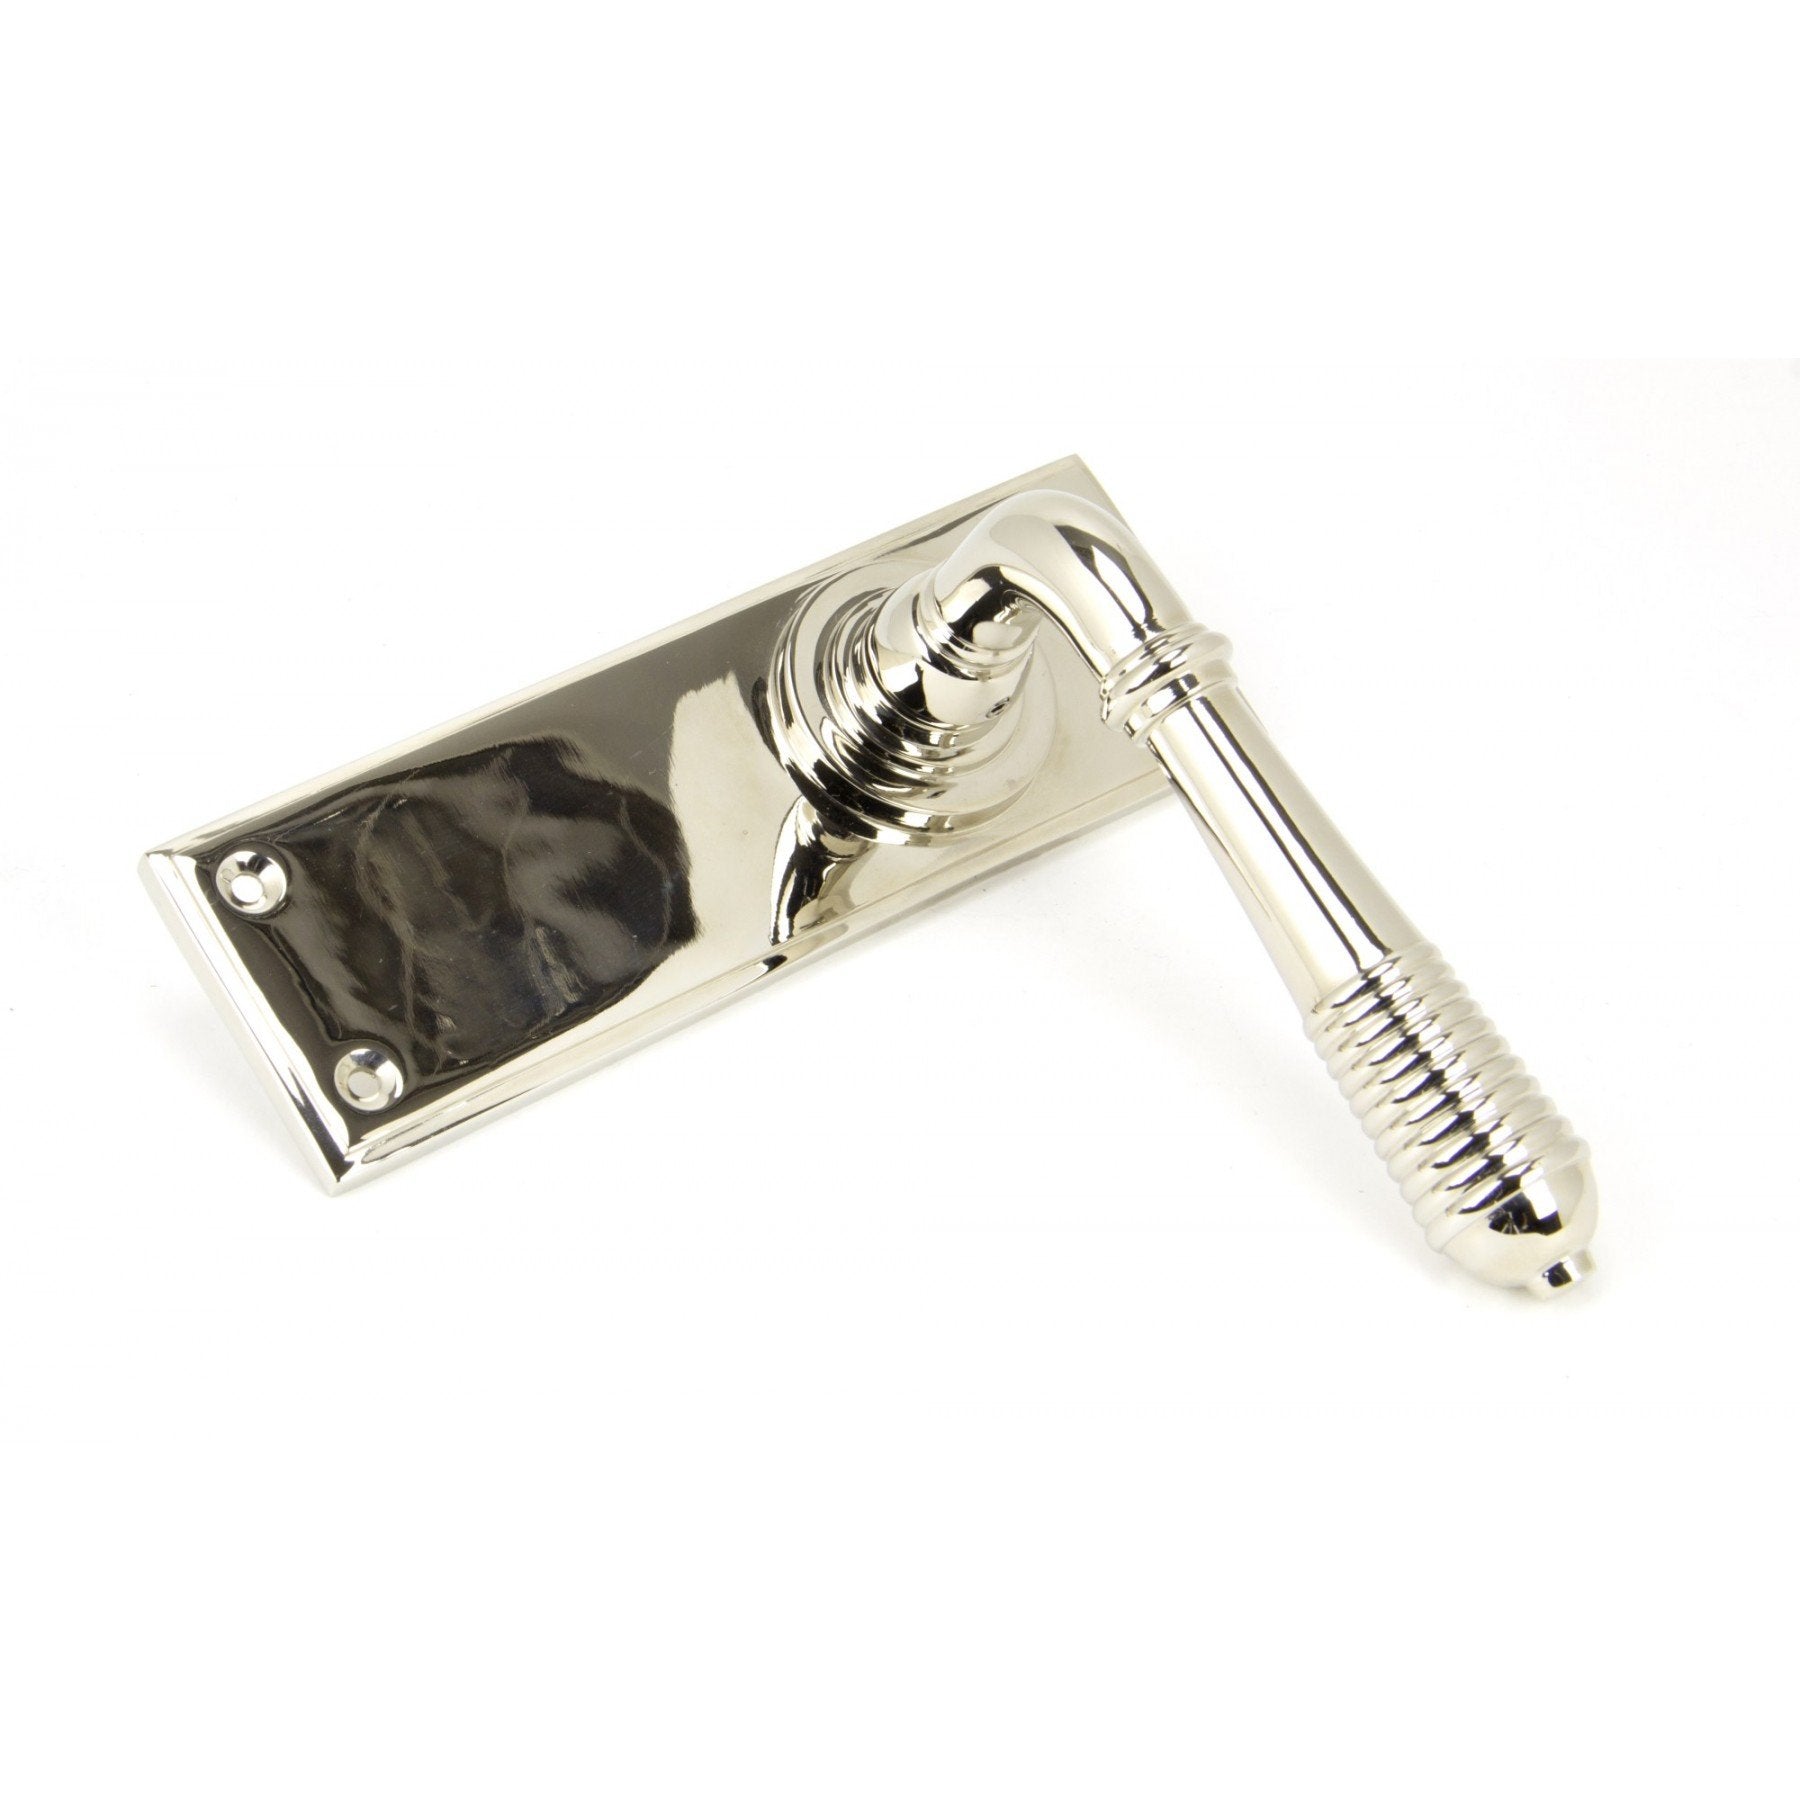 From the Anvil Polished Nickel Reeded Lever Latch Set